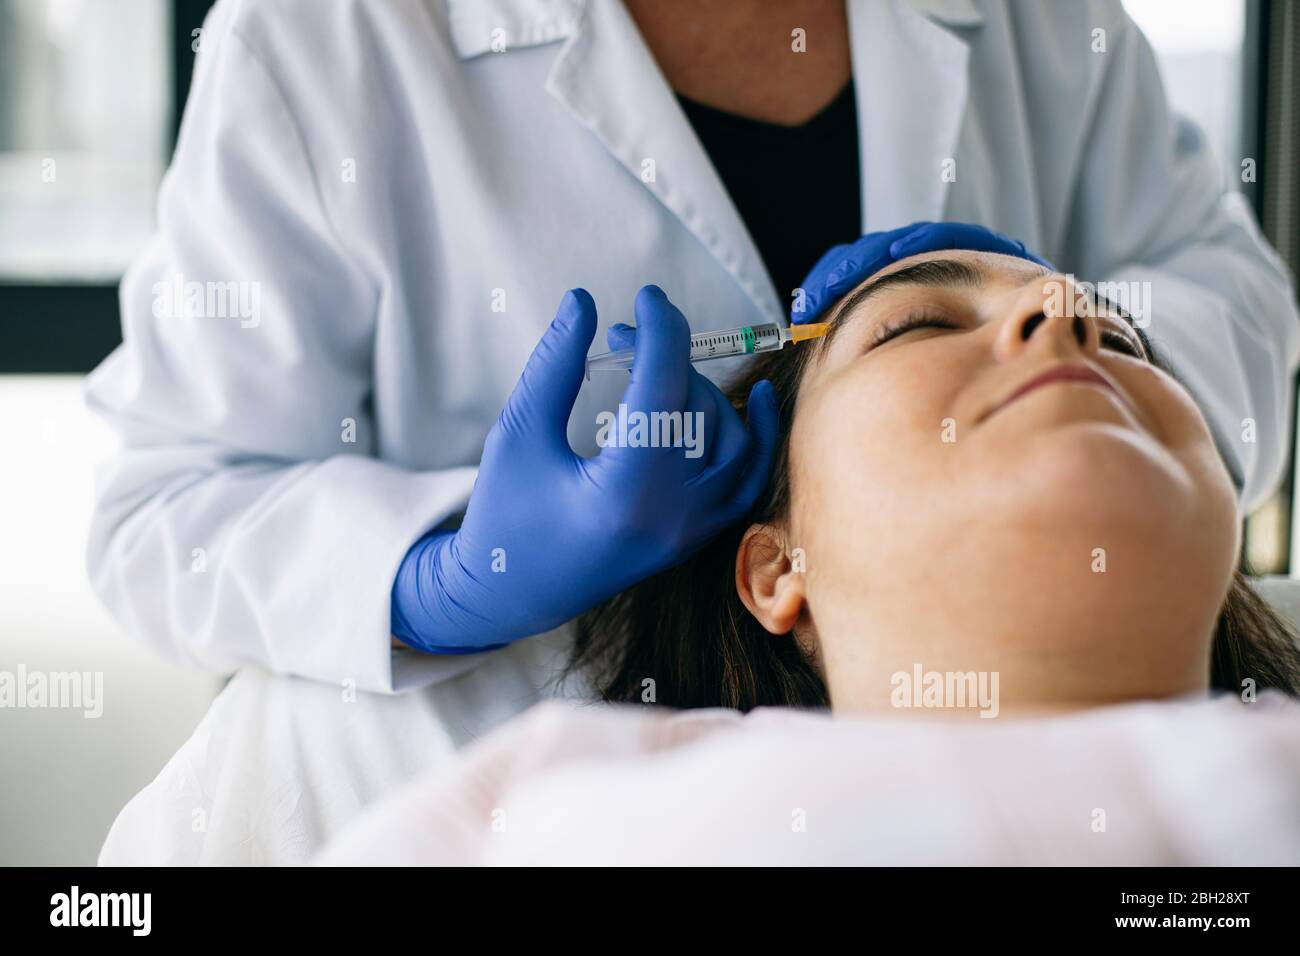 Woman receiving hyaluronic acid injection in medical practice Stock Photo